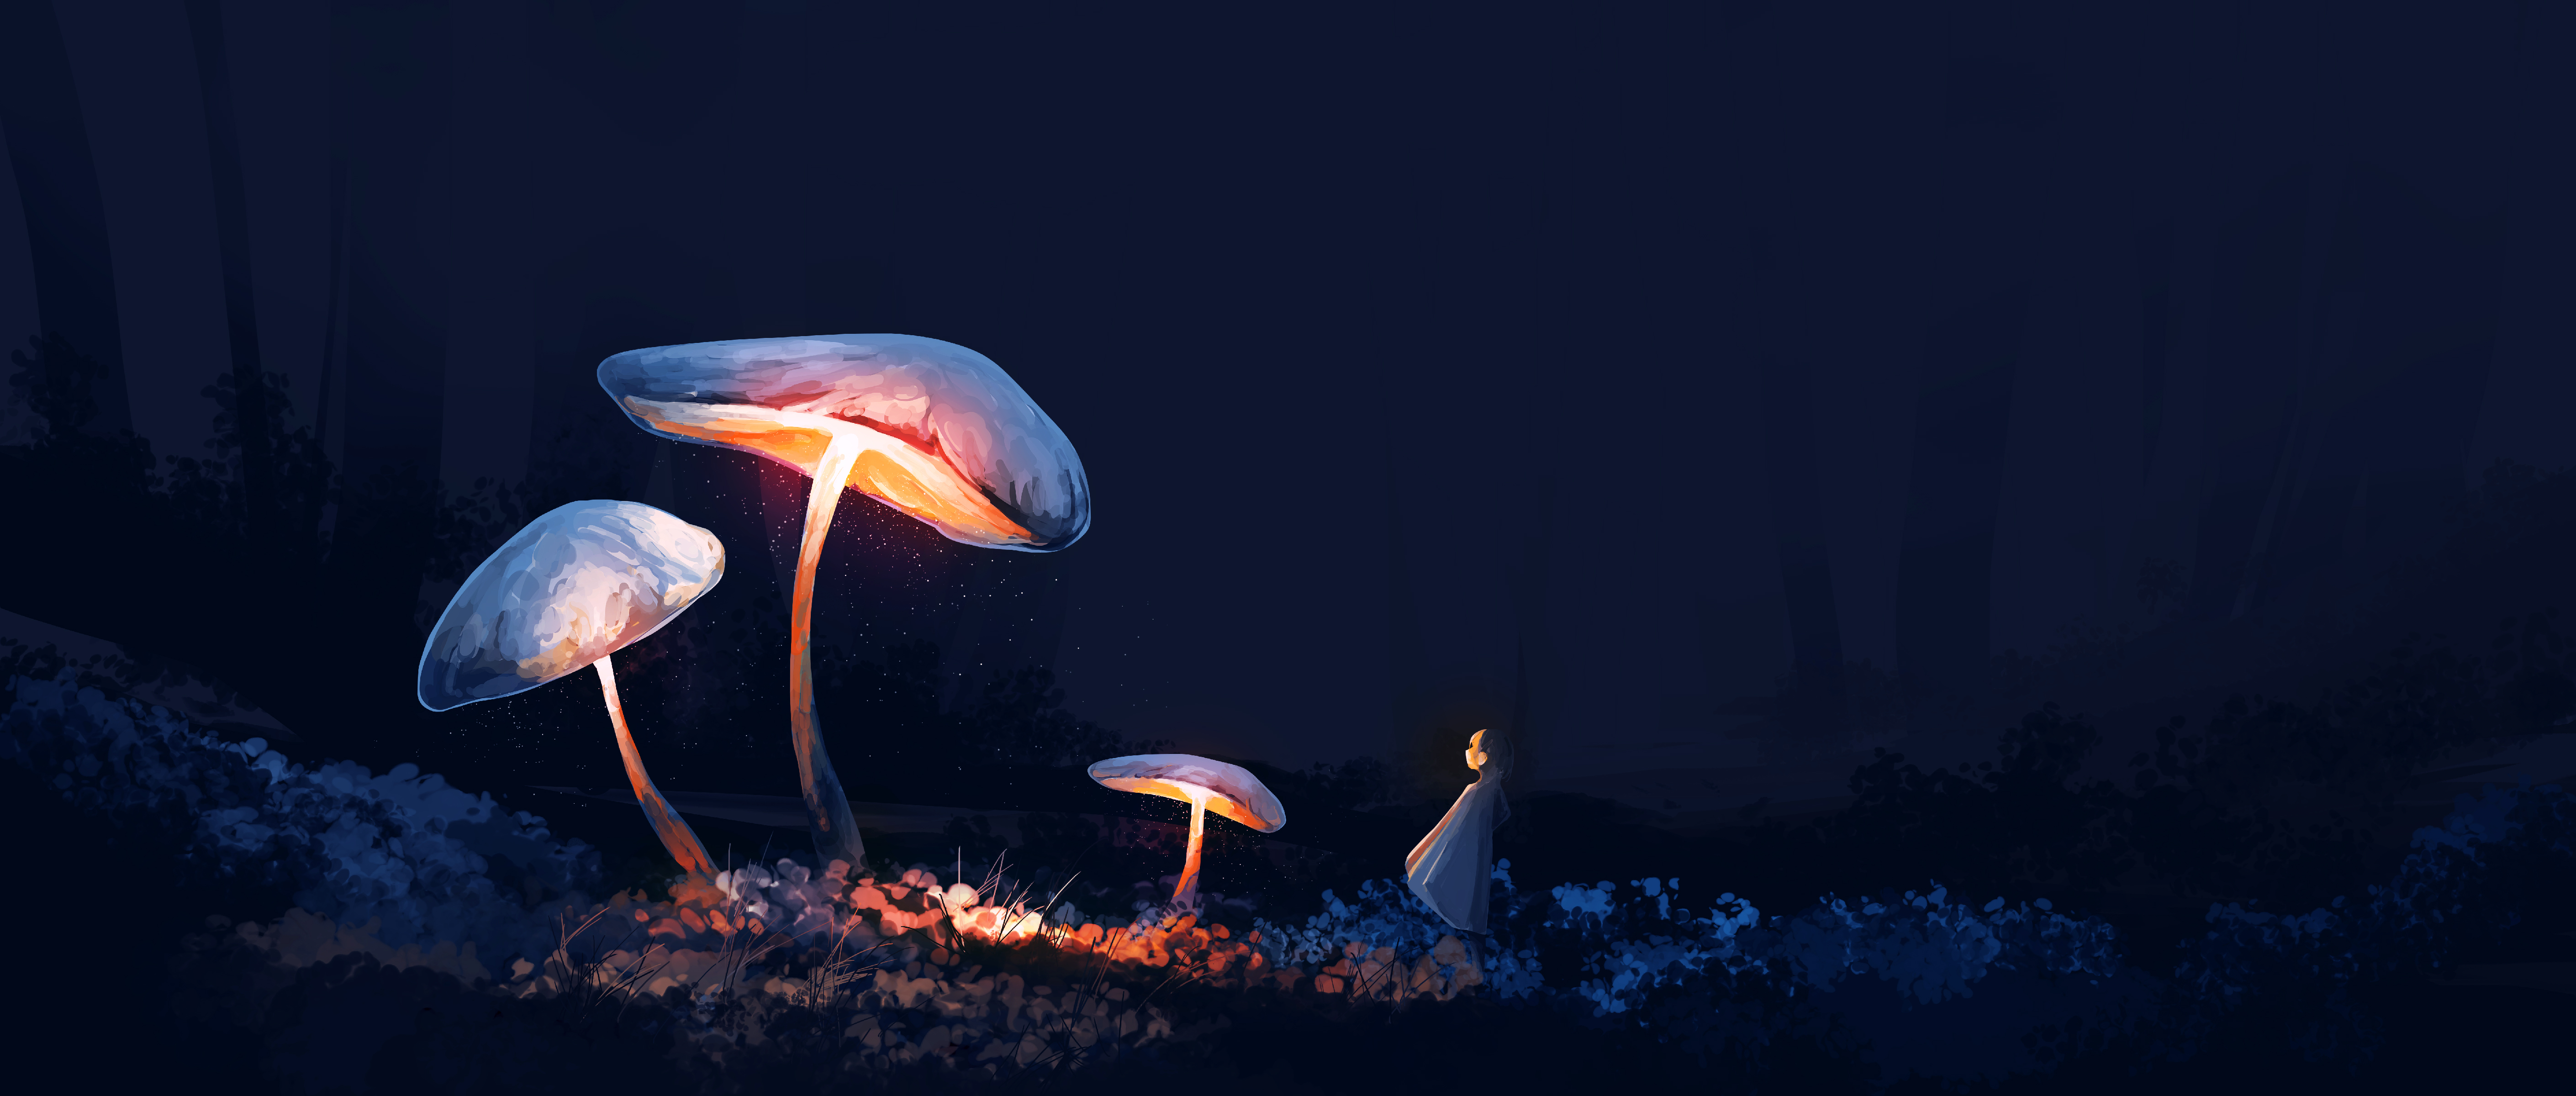 Cute Mushroom Wallpaper Background Wallpaper Image For Free Download   Pngtree